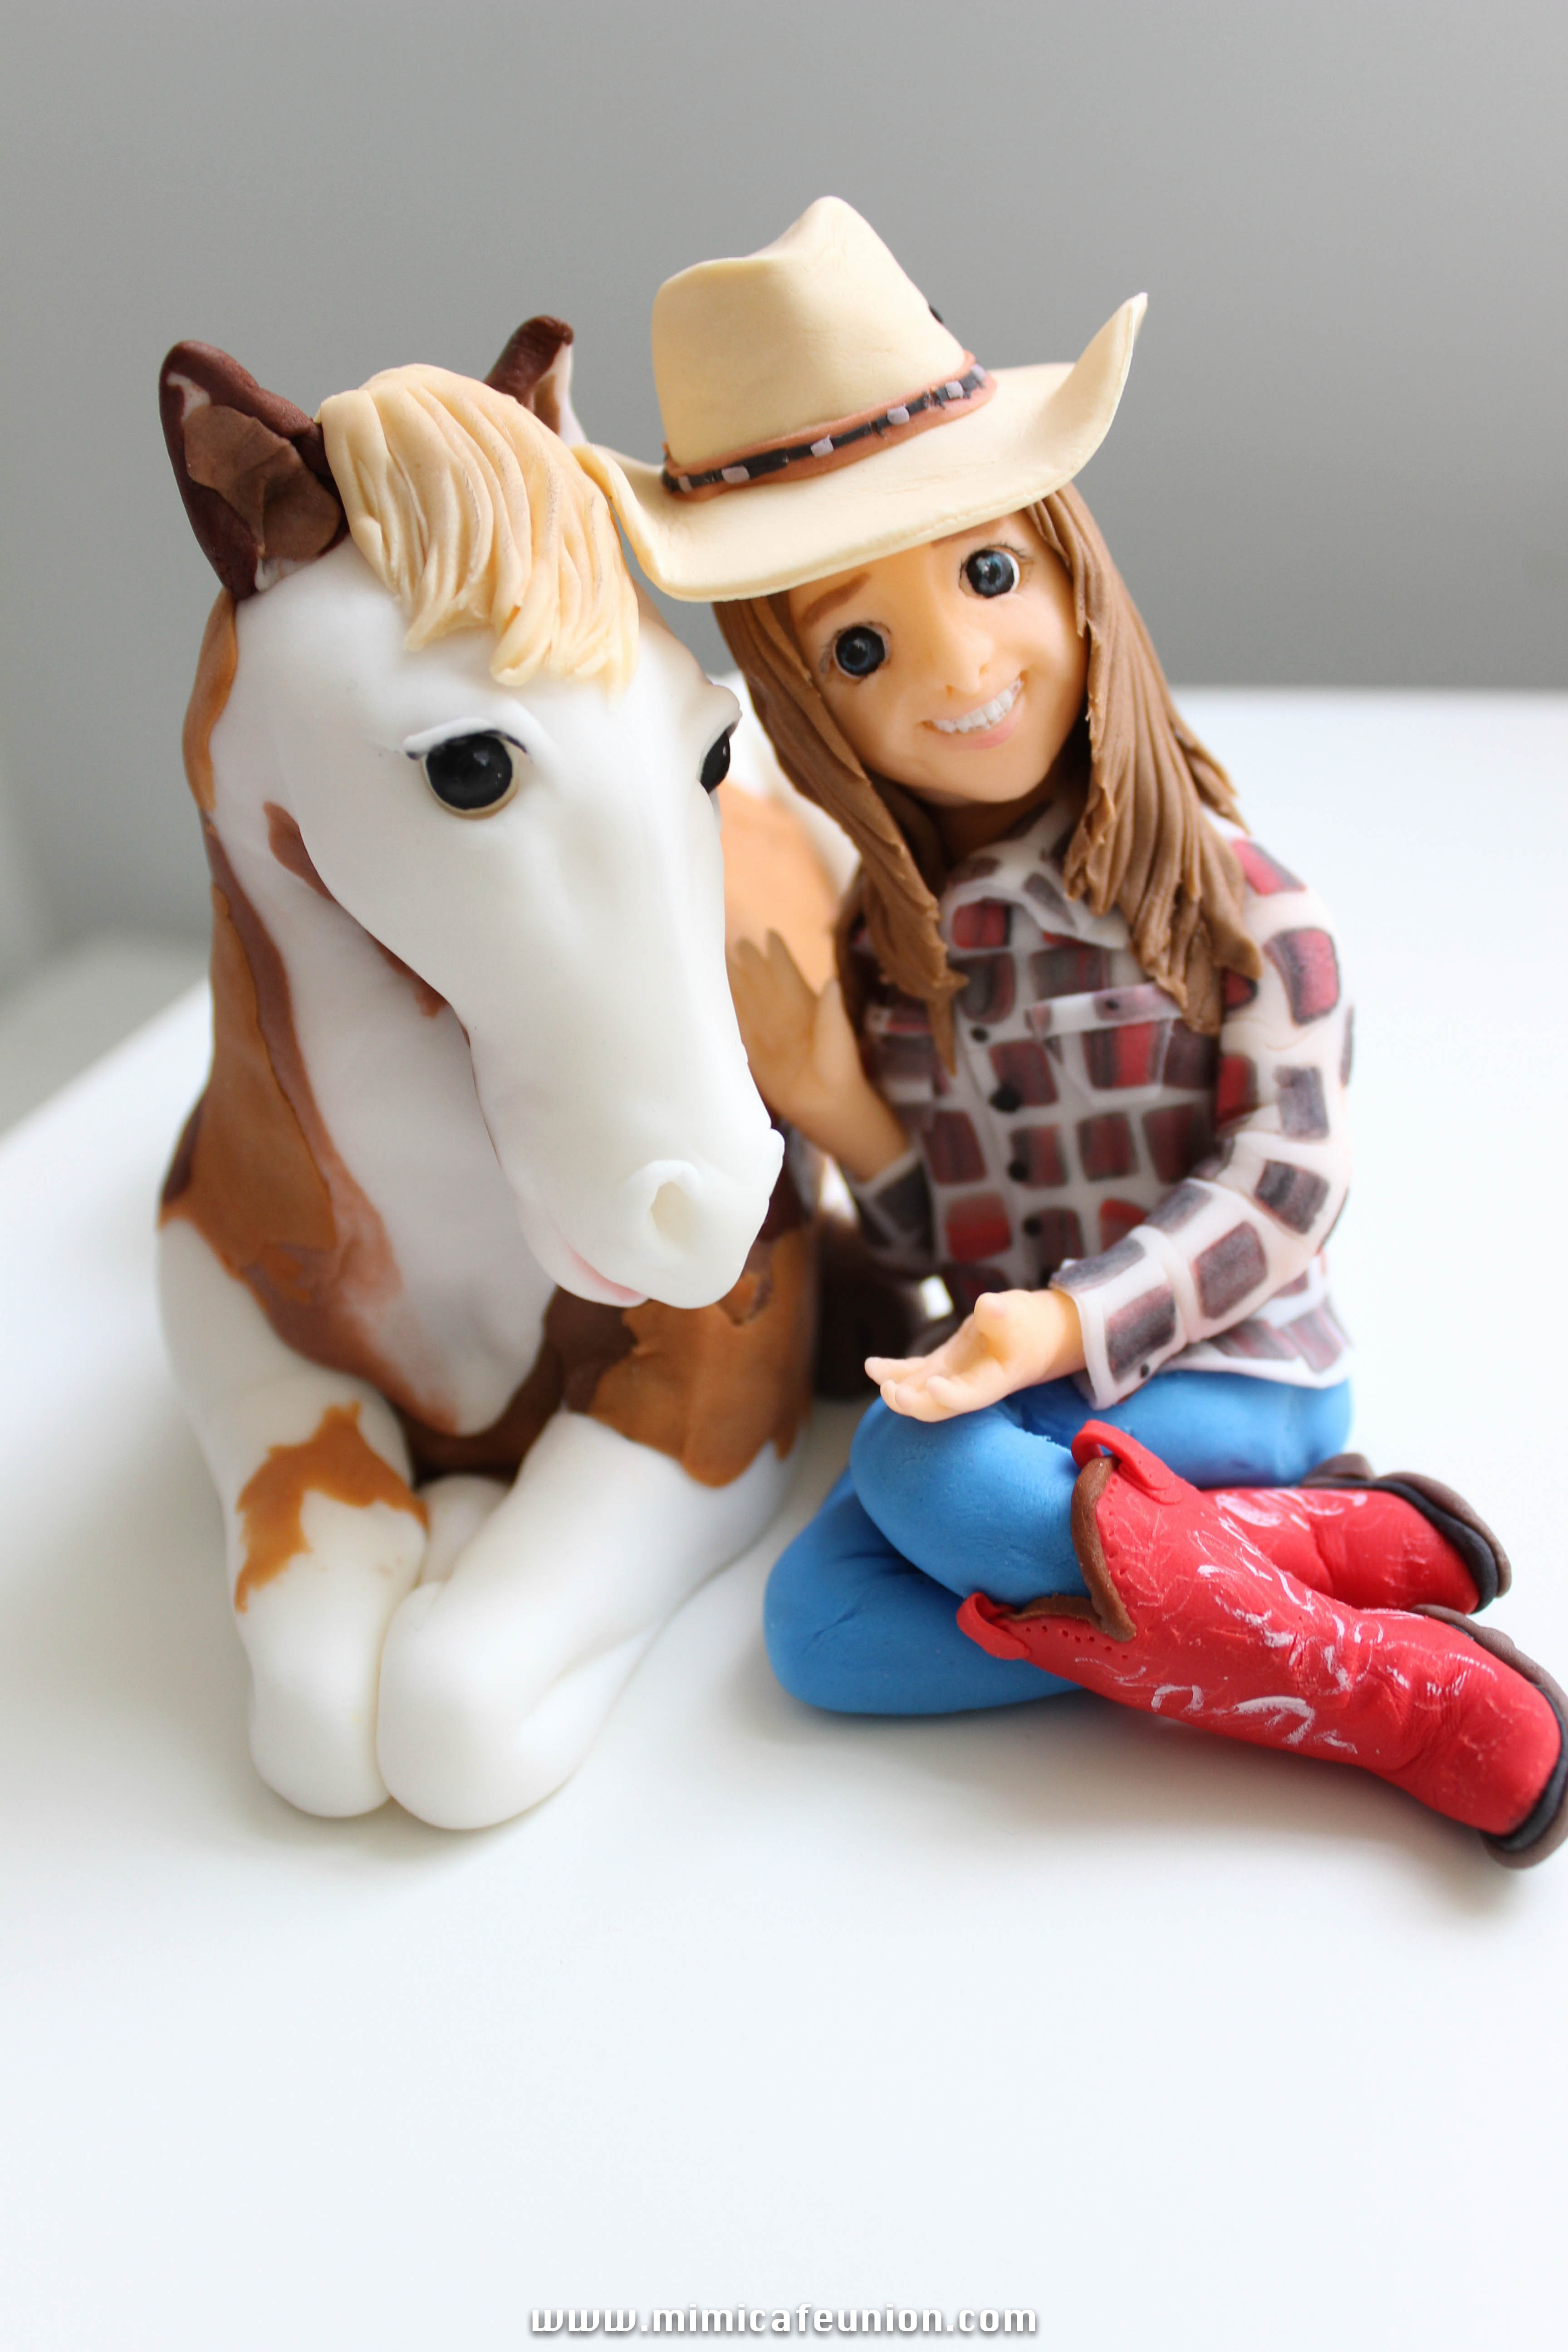 Horse Cake Toppers For Wedding Cakes
 Horse Wedding Cake topper